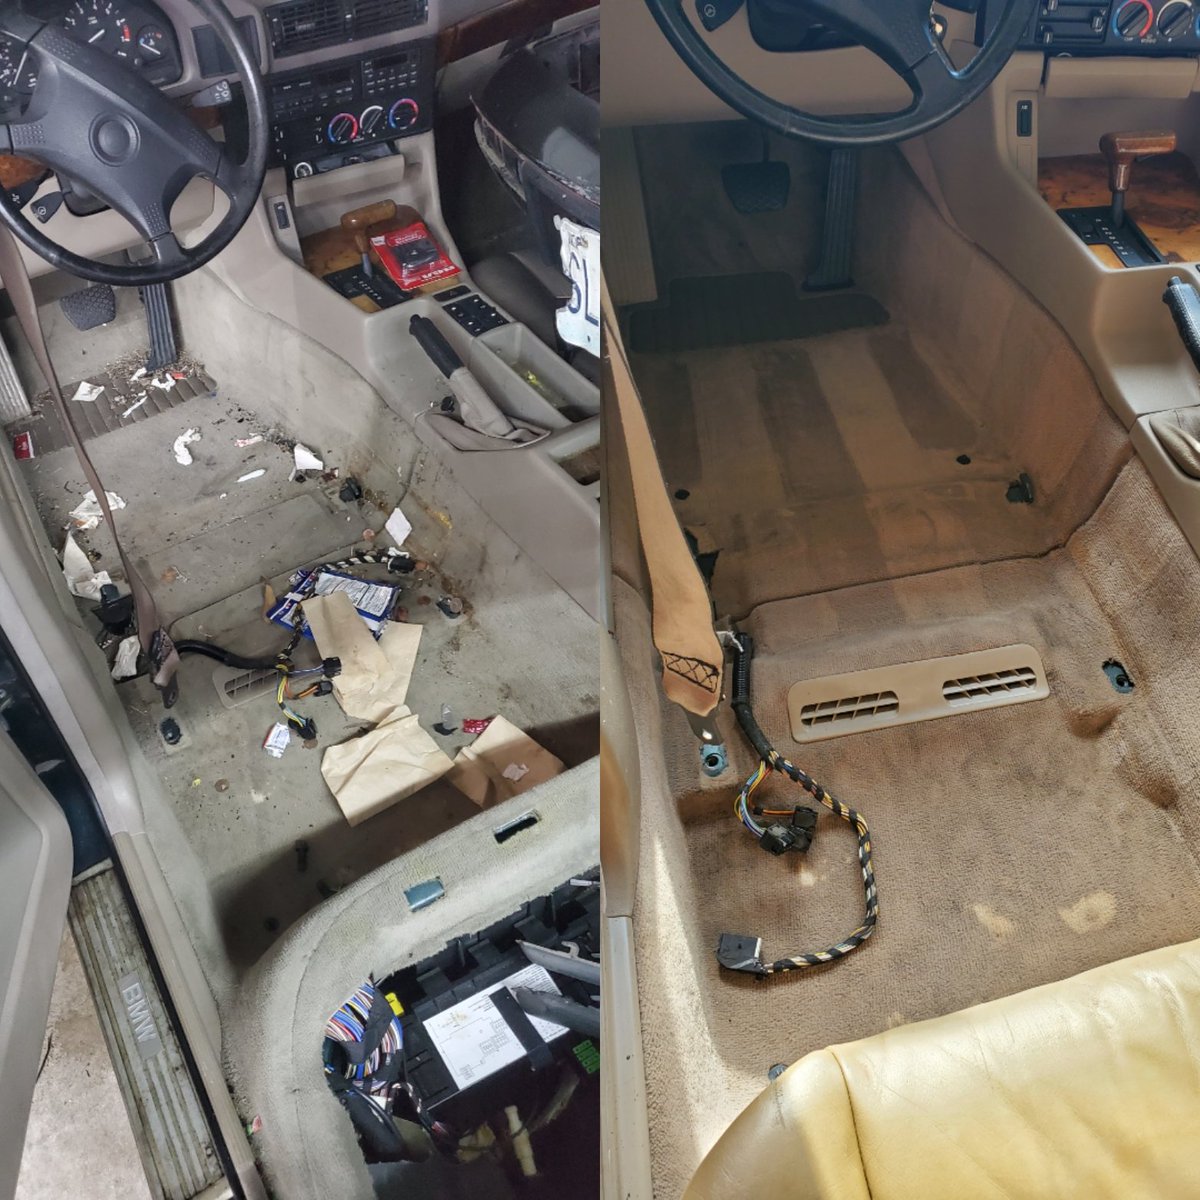 More progress on the interior. Drivers side carpets cleaned, moved on to the center console area. Really getting into the books and crannies